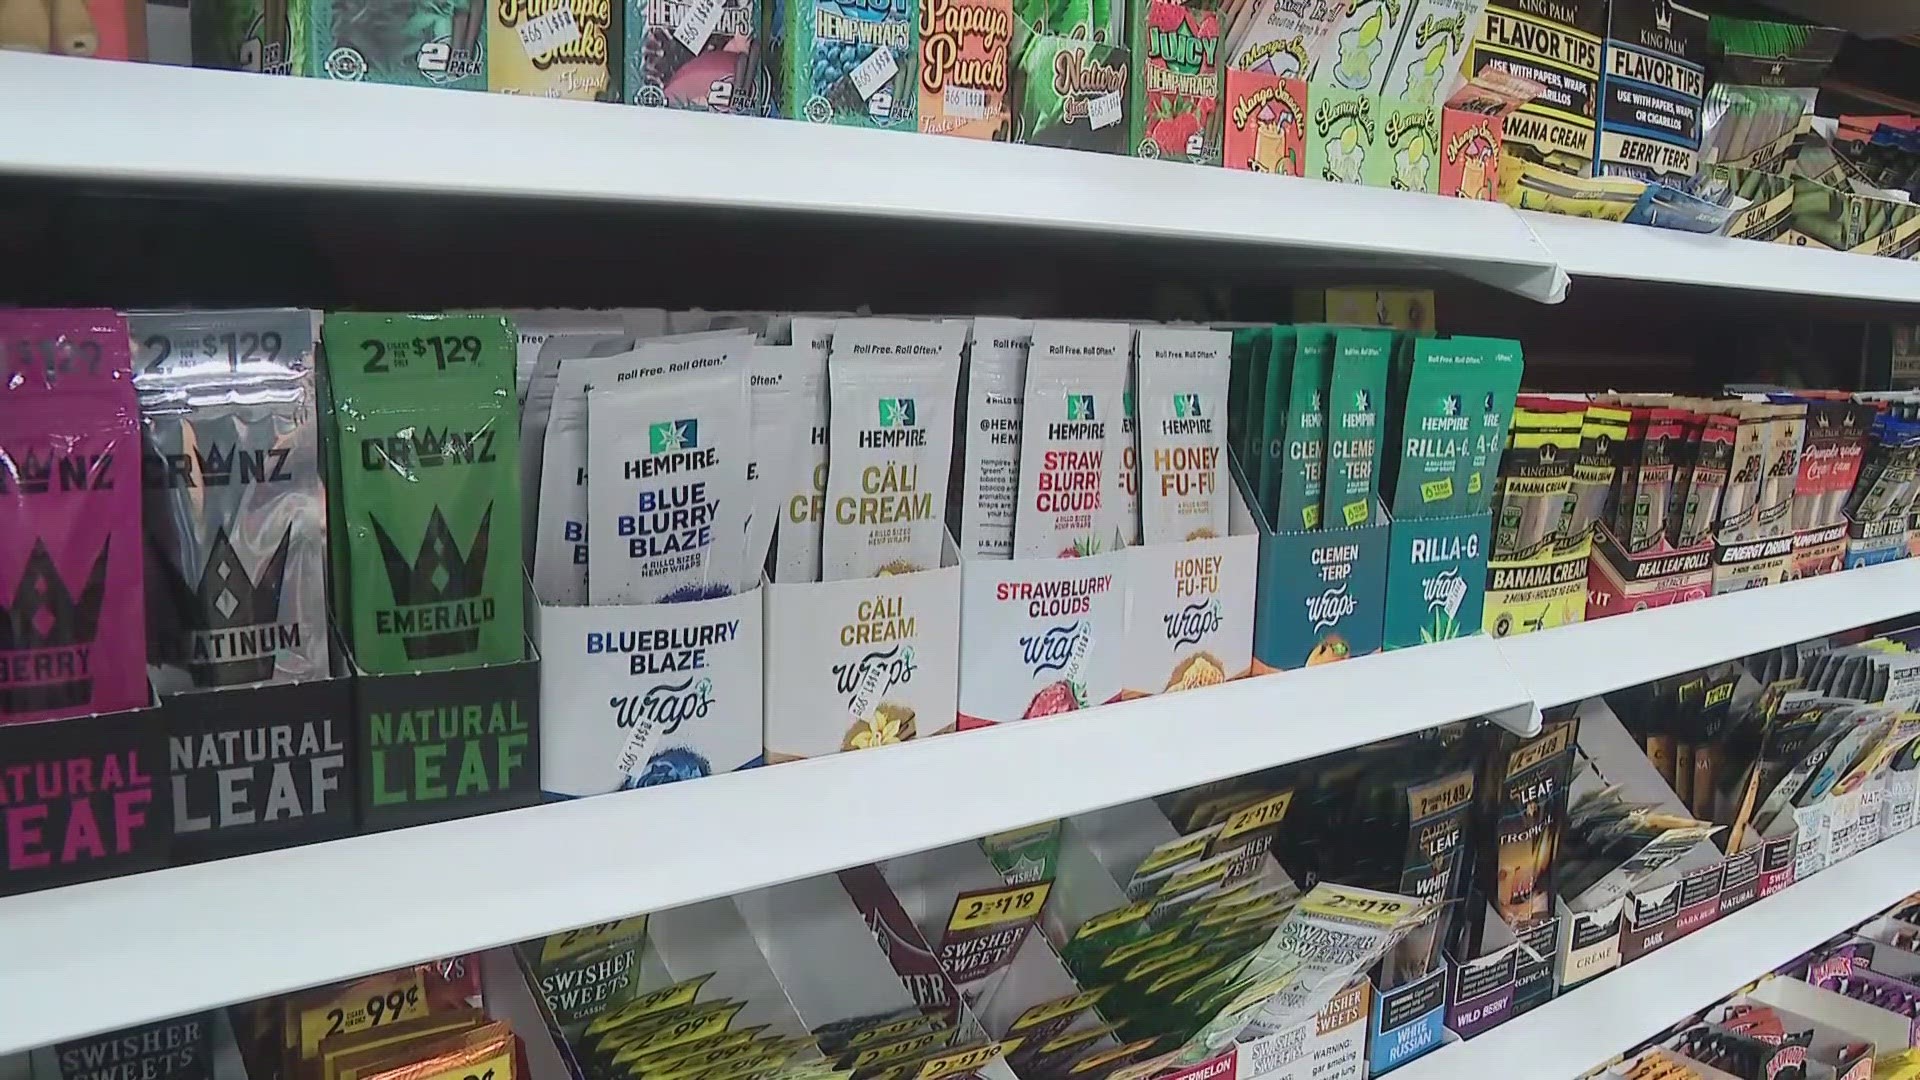 The ban includes menthol cigarettes and flavored vaping products.